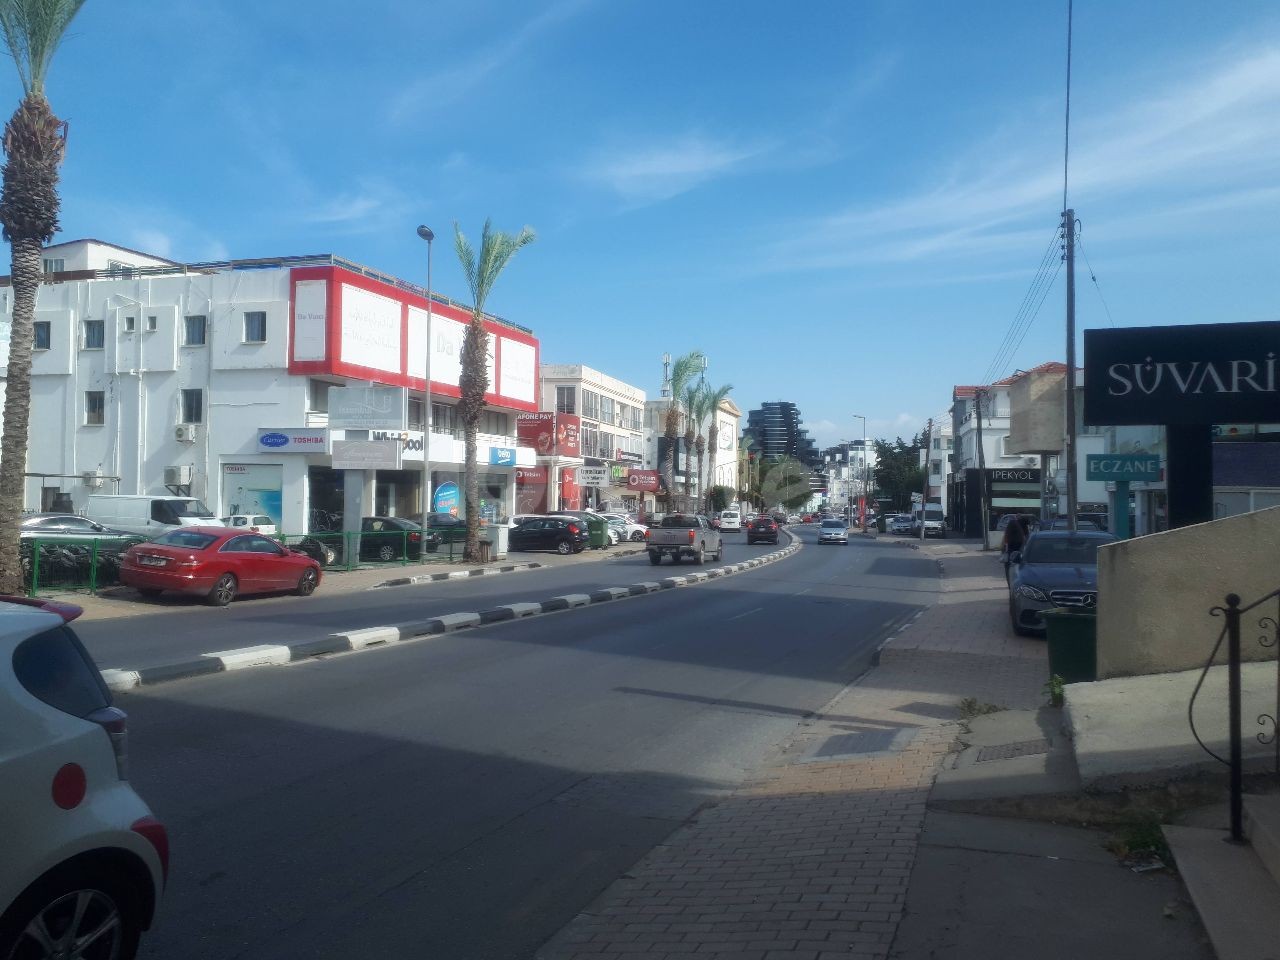 For Sale by Owner, Located on Main Street in Kyrenia Center